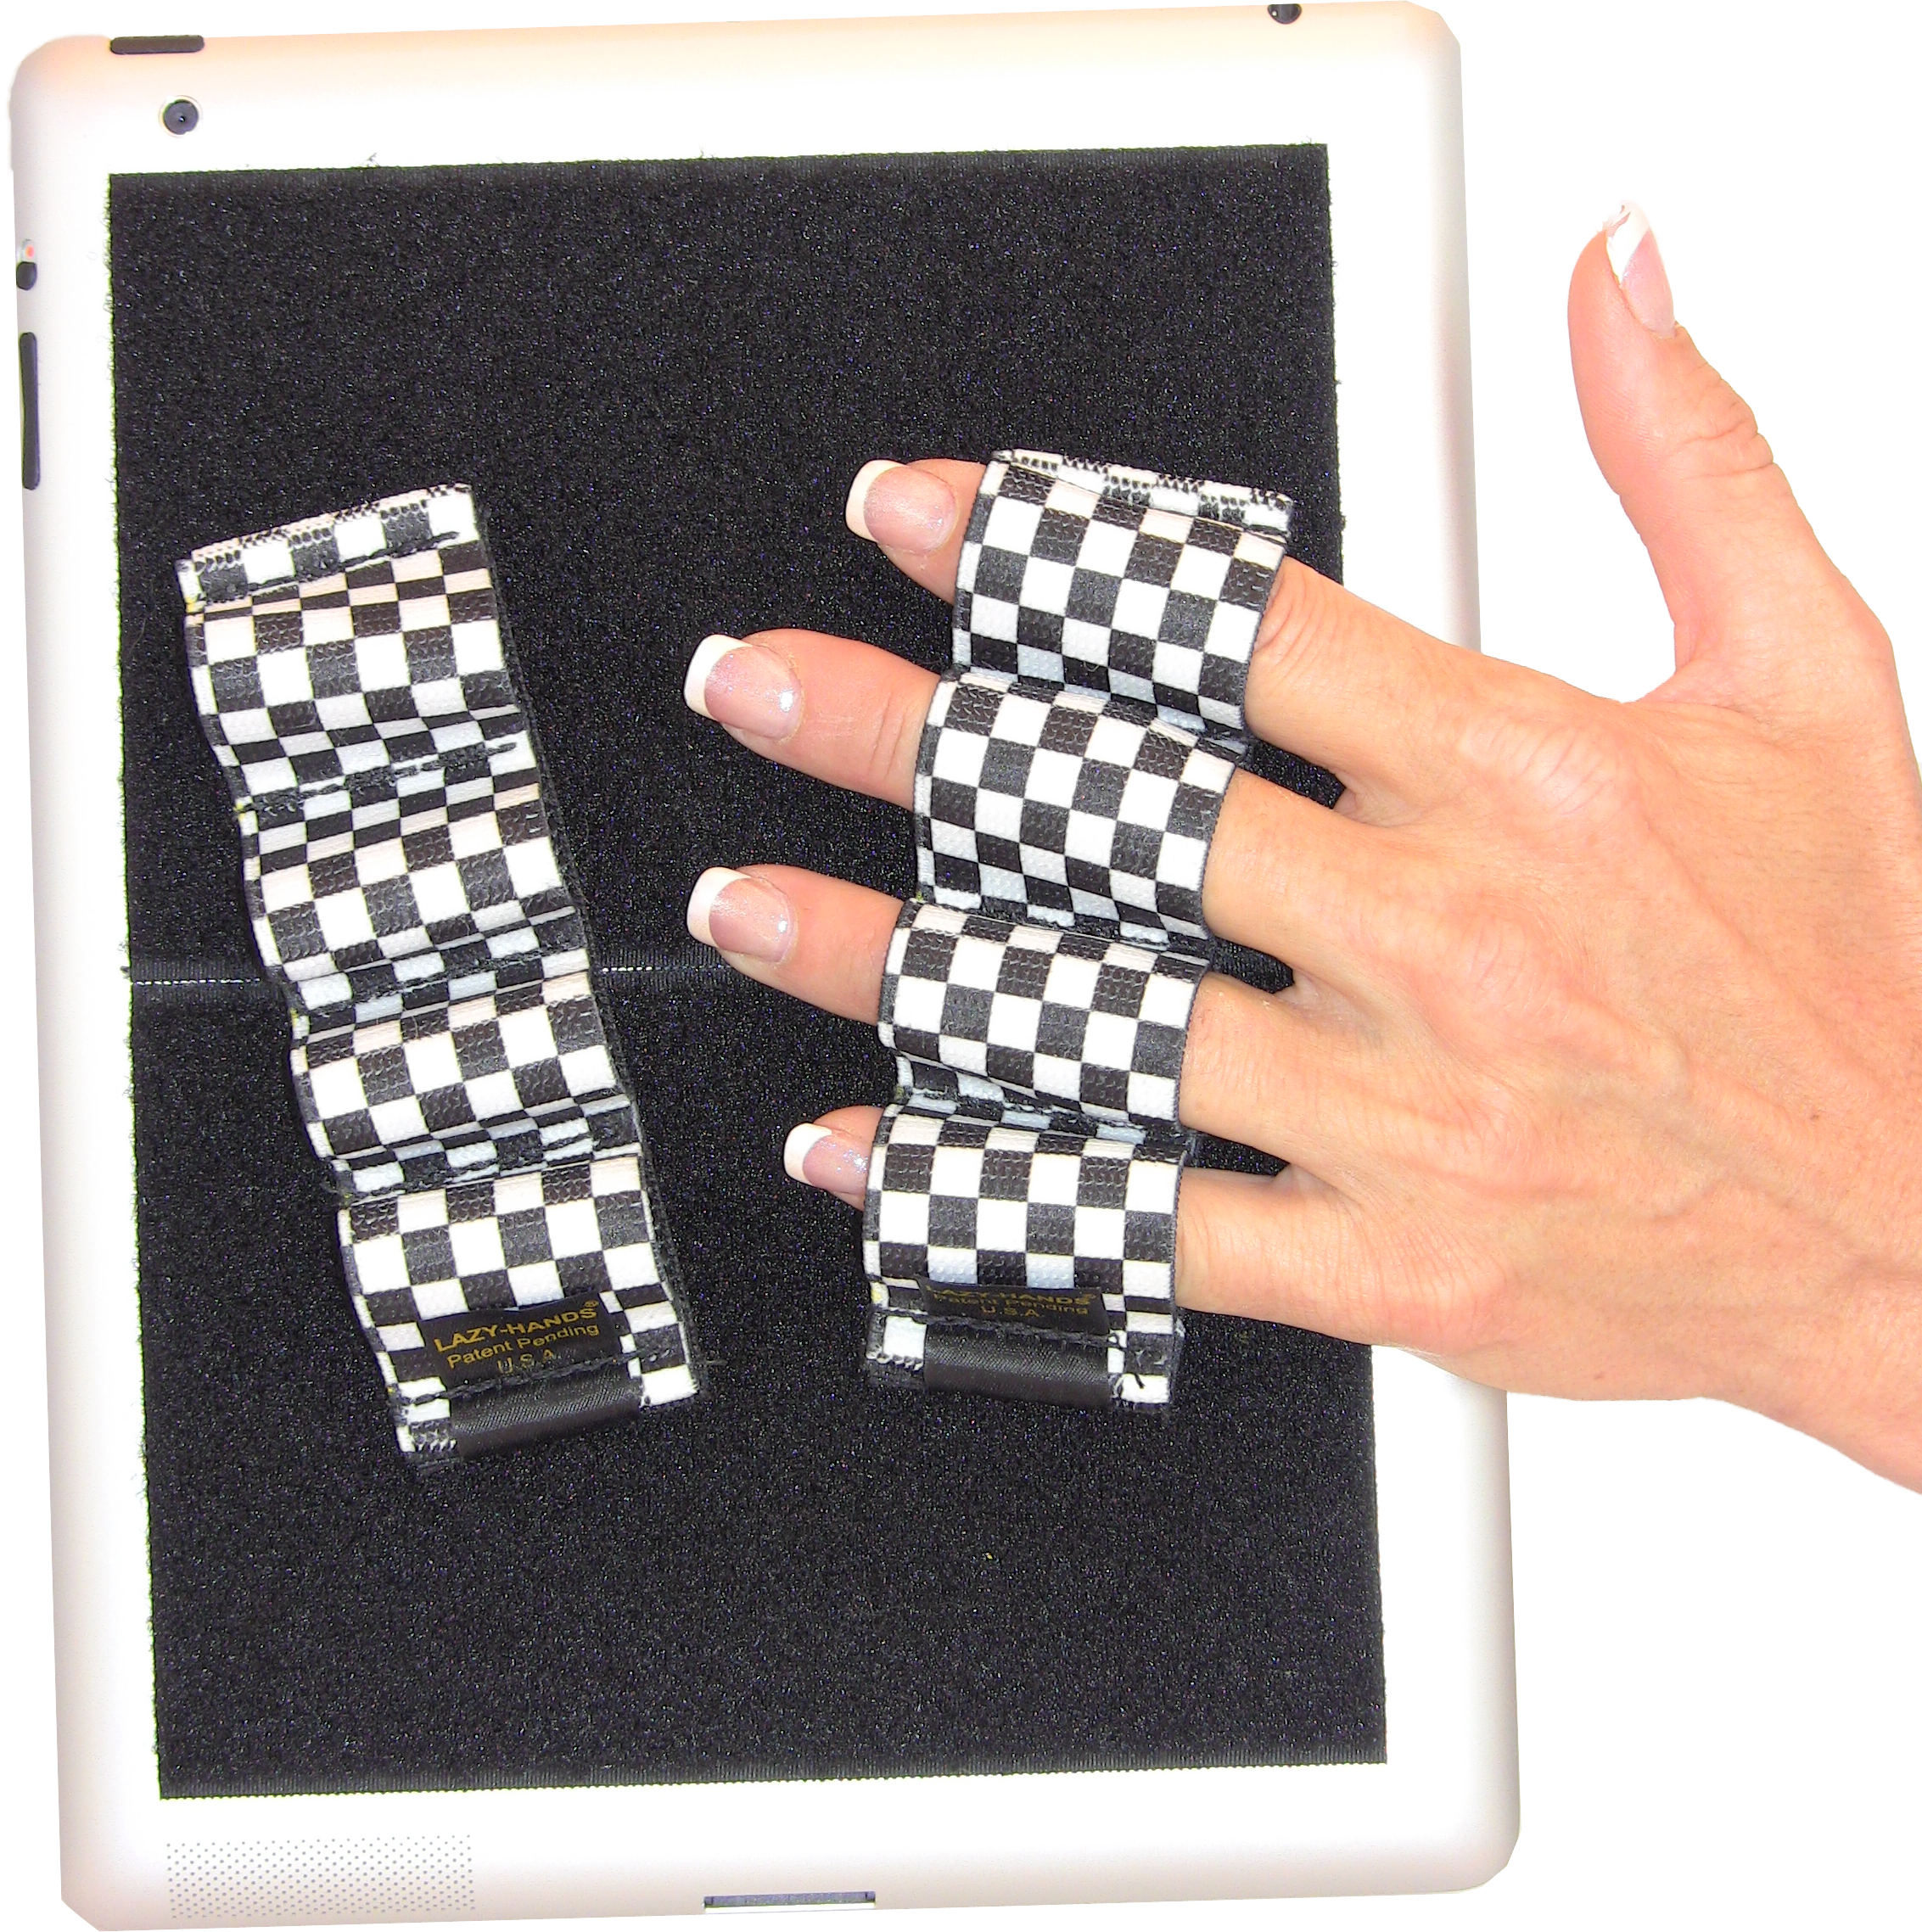 Heavy Duty 4-Loop Grips for iPad or Large Tablet (x2) - Black & White Checkers